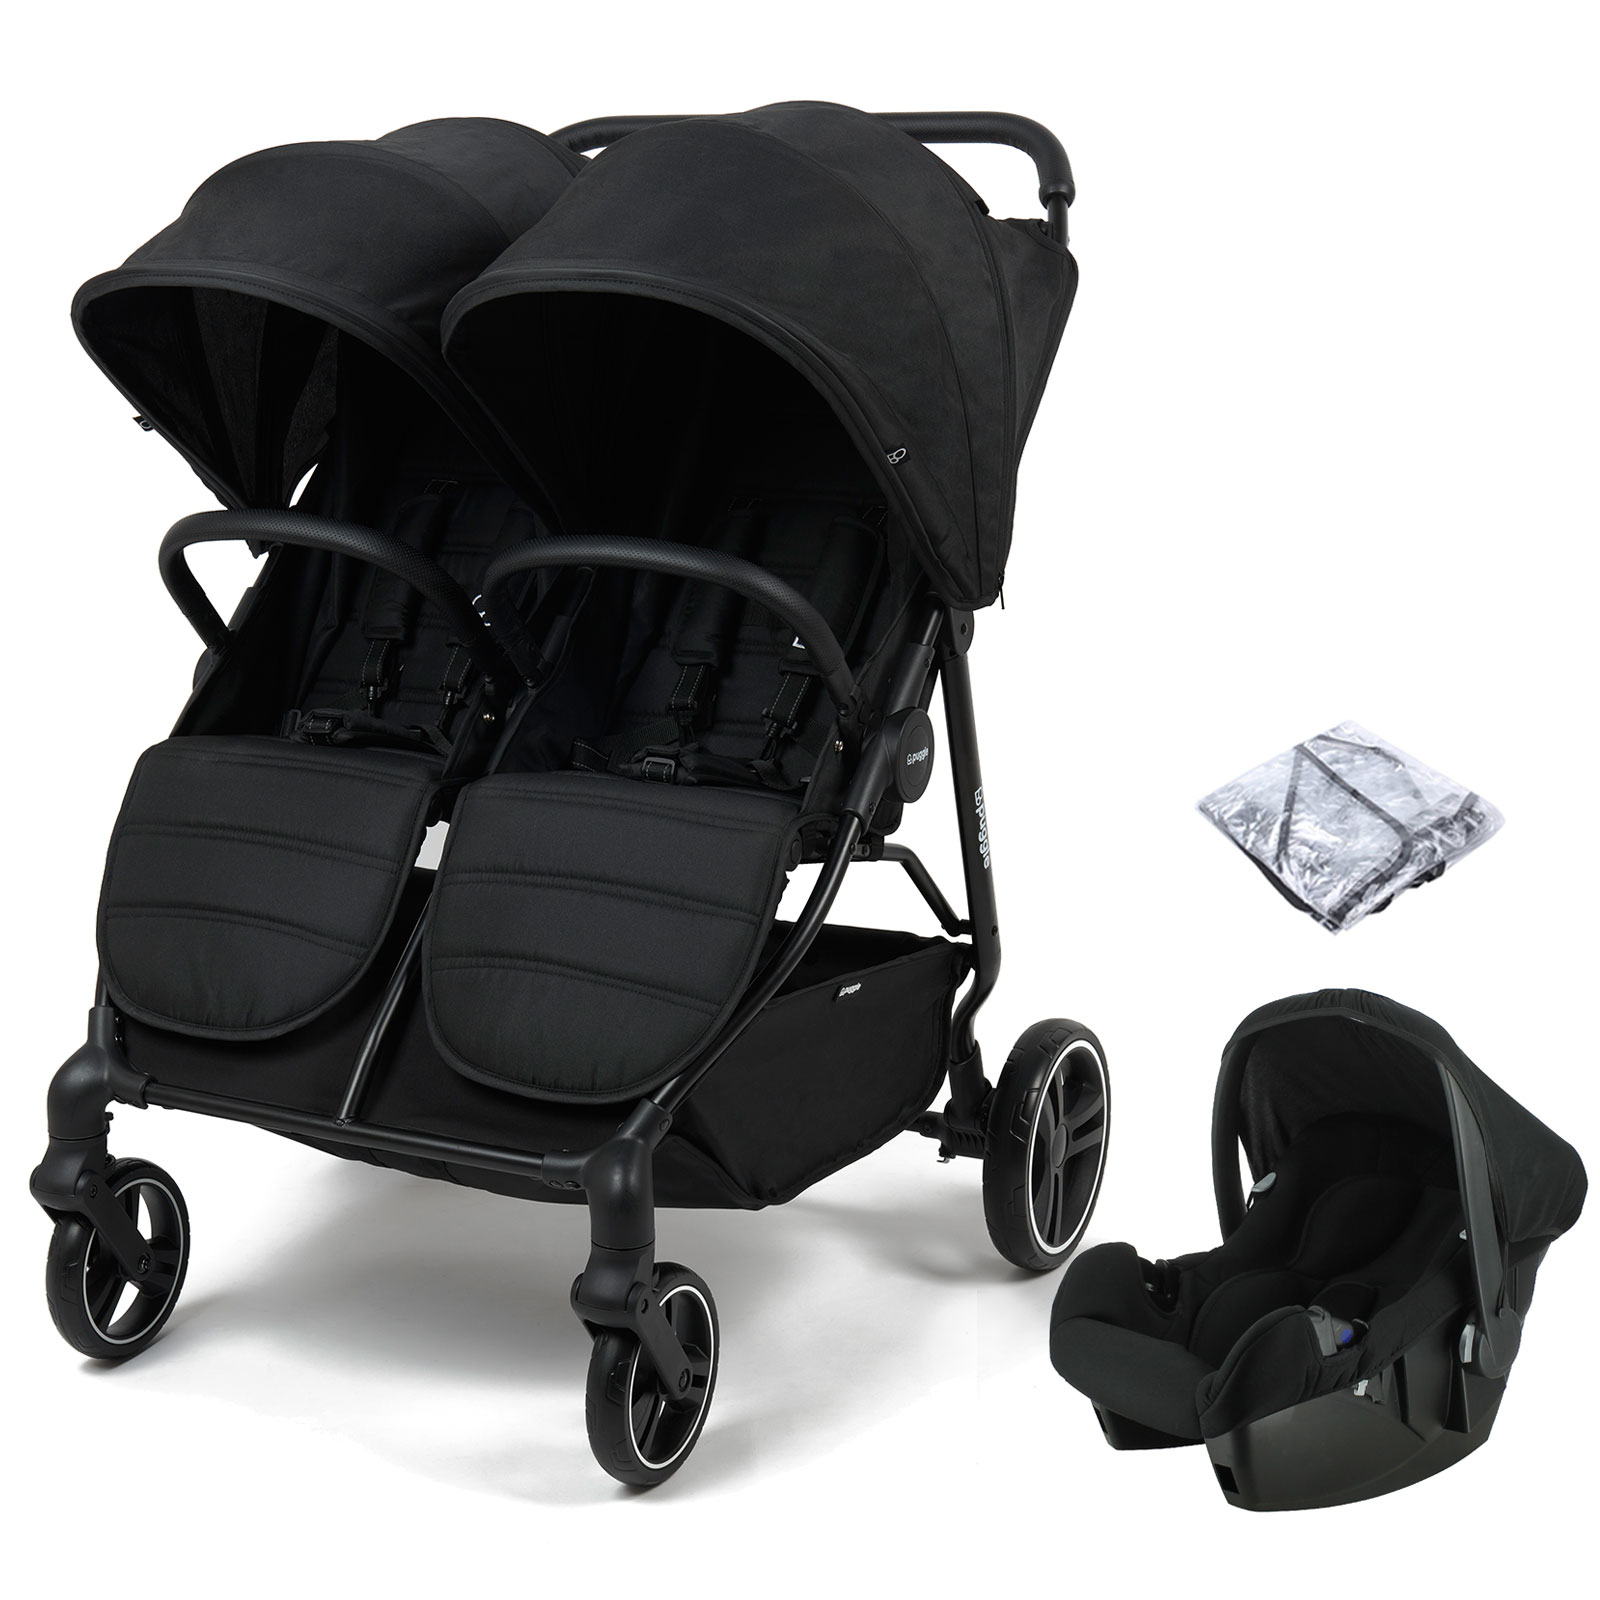 Puggle Urban City Easyfold Twin Travel System with Beone Car Seat Bundle - Storm Black